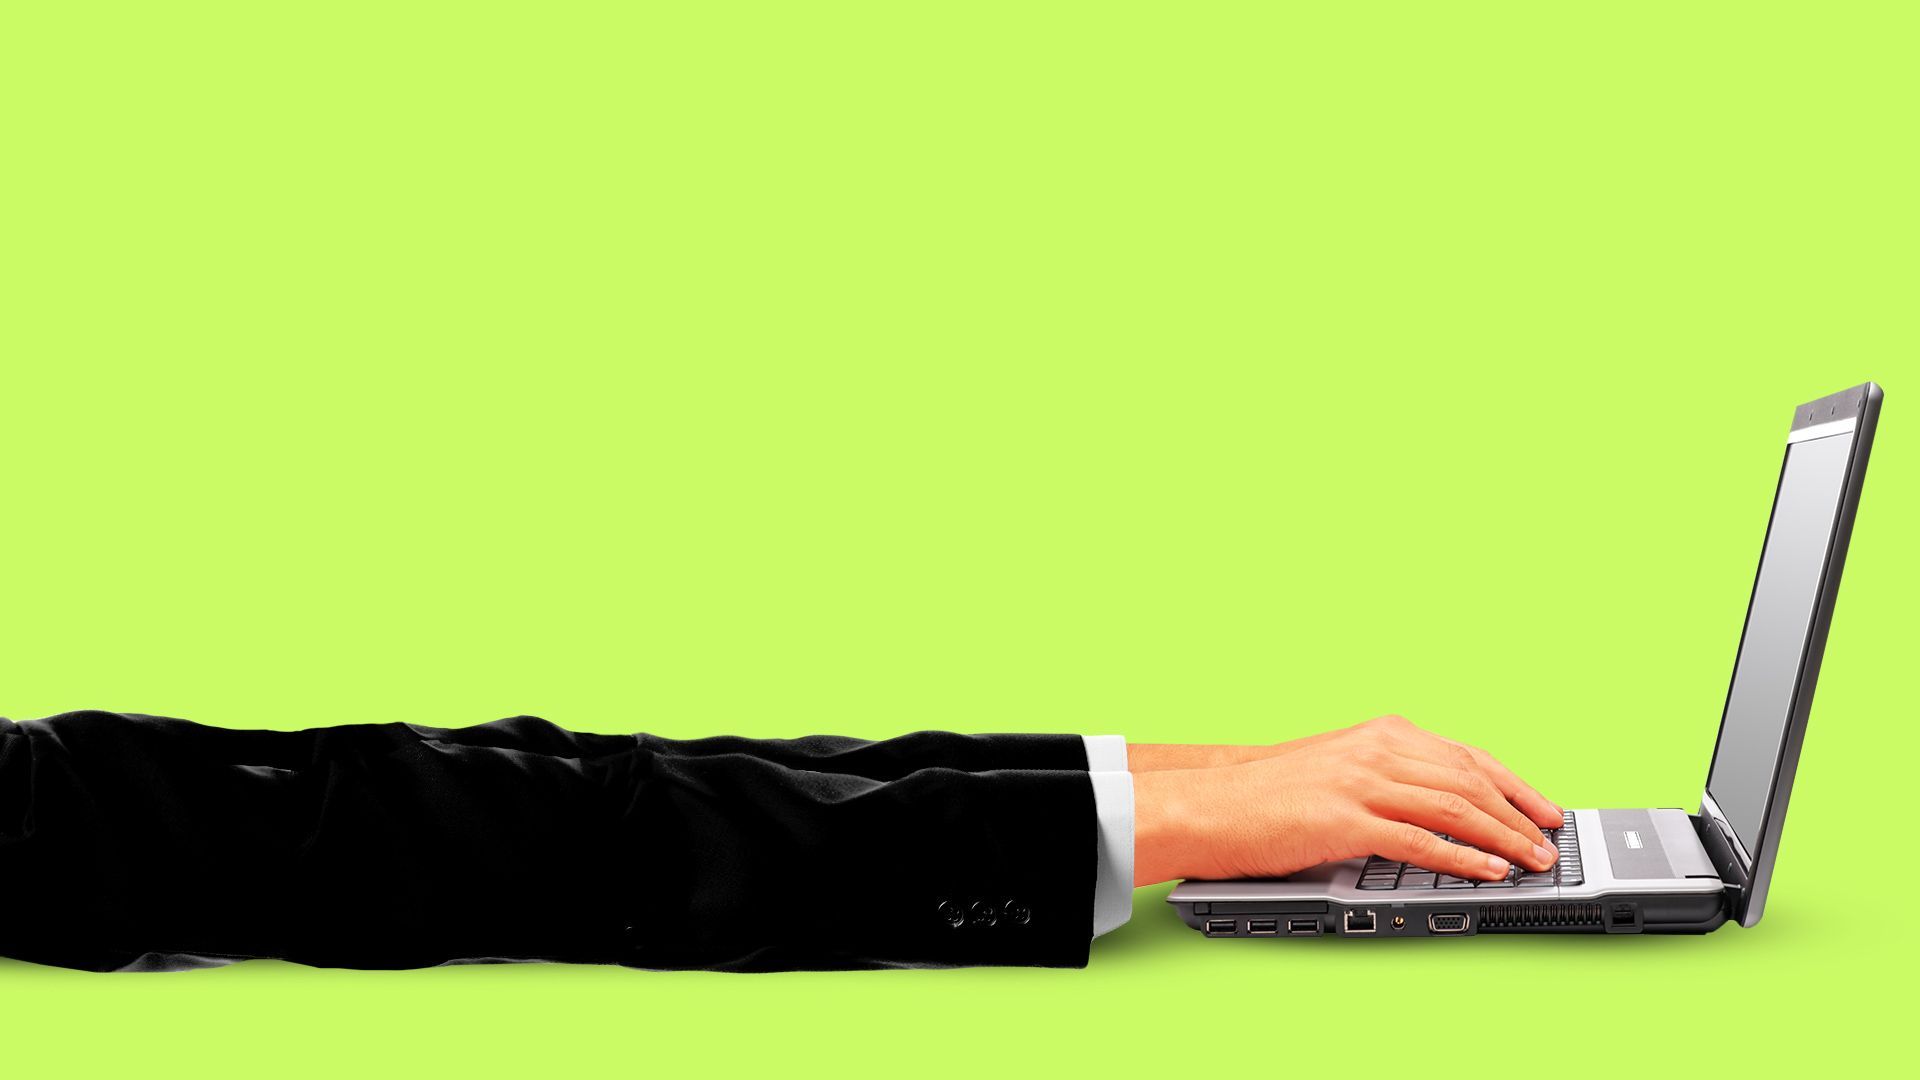 Illustration of a pair of hands with super long arms reaching out and working on a laptop